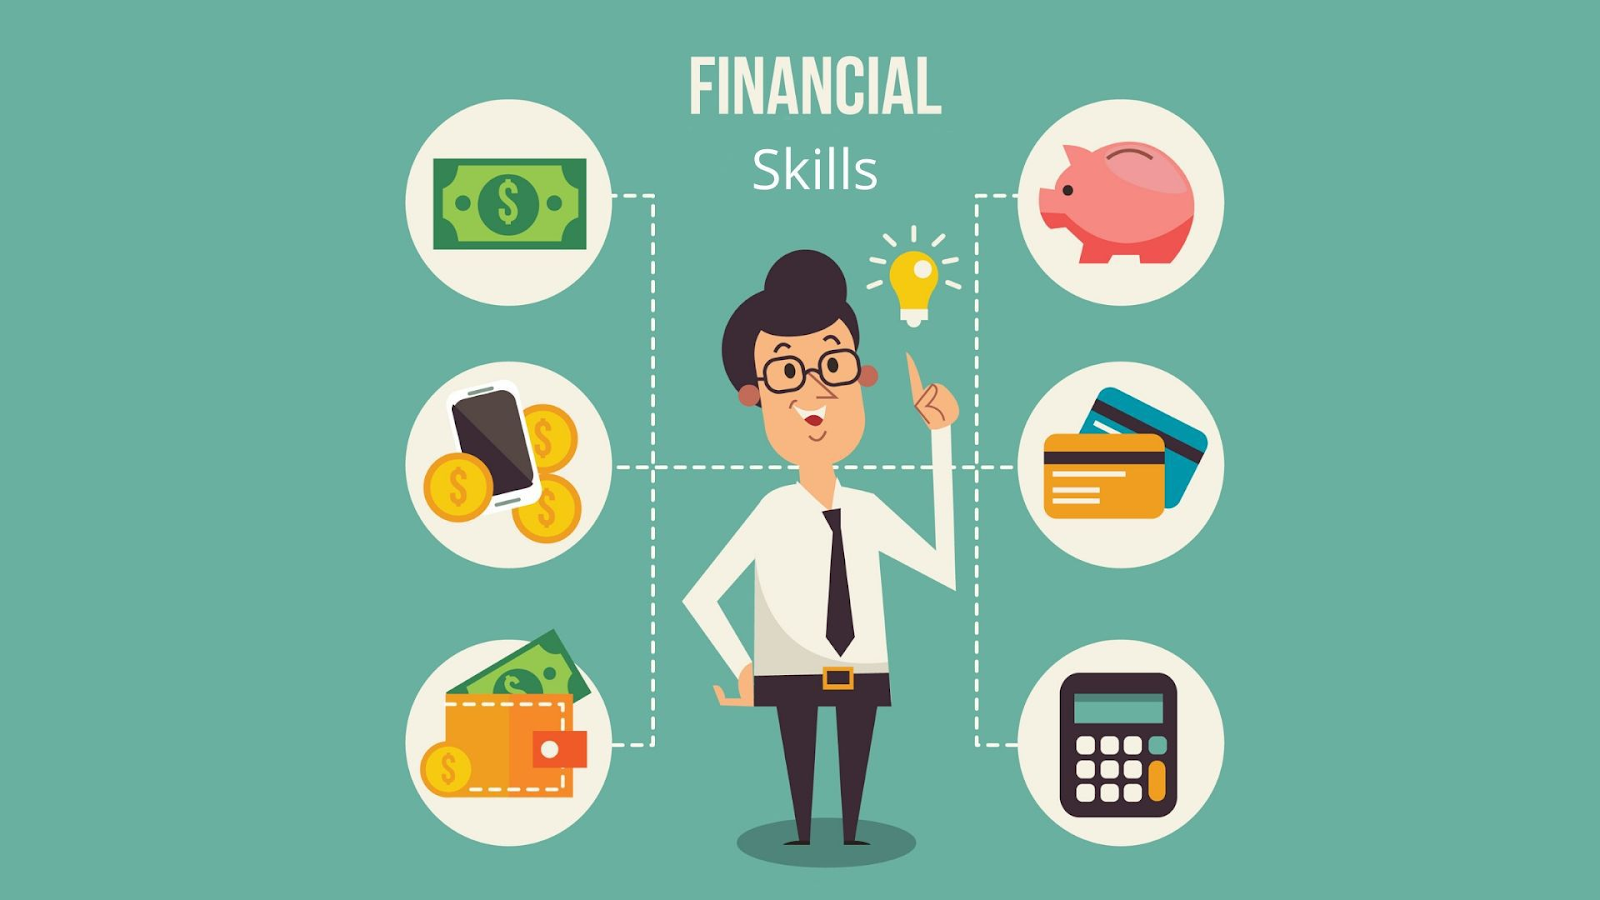 Successful businesses financial skills